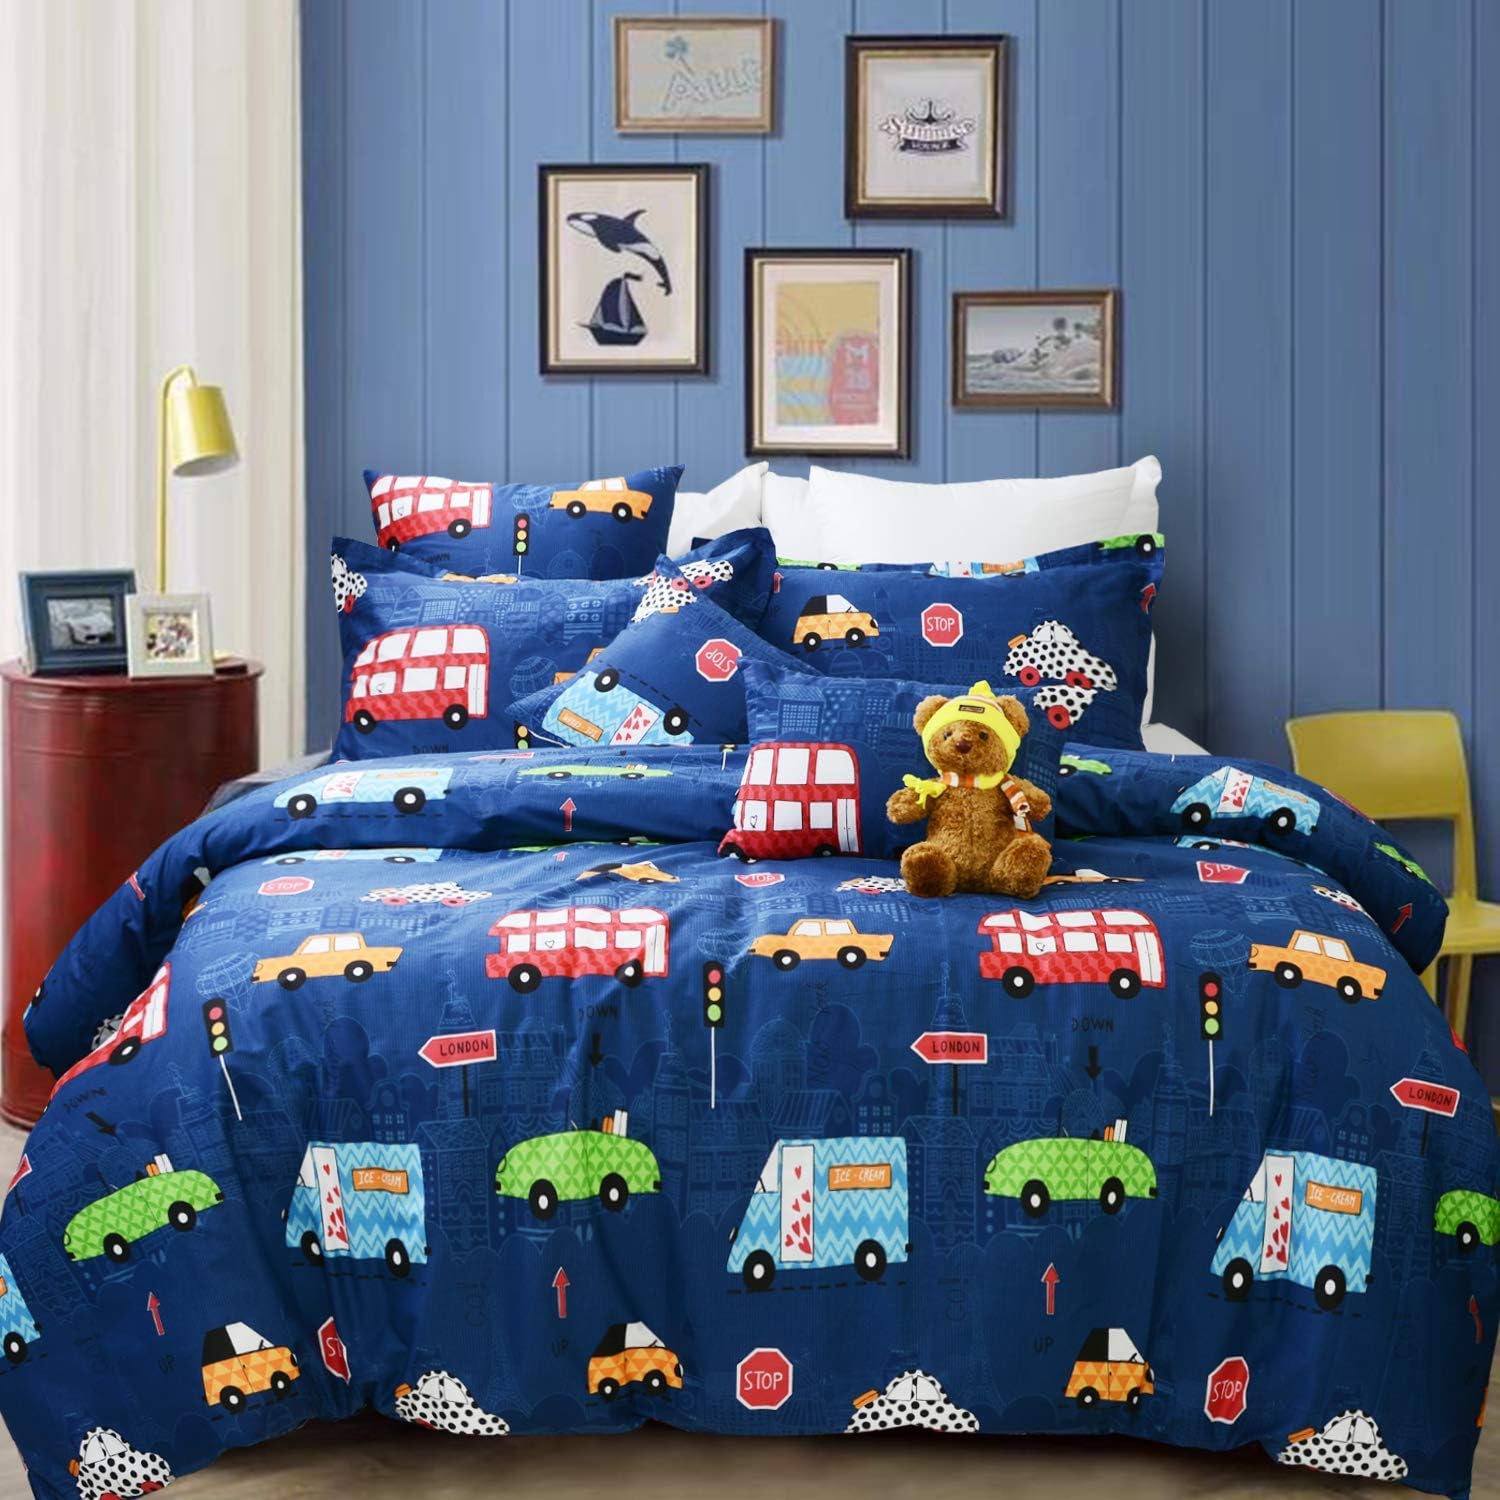 Ends Tonight! Michorinee Boys Double Duvet Cover Set - New Offers to Score